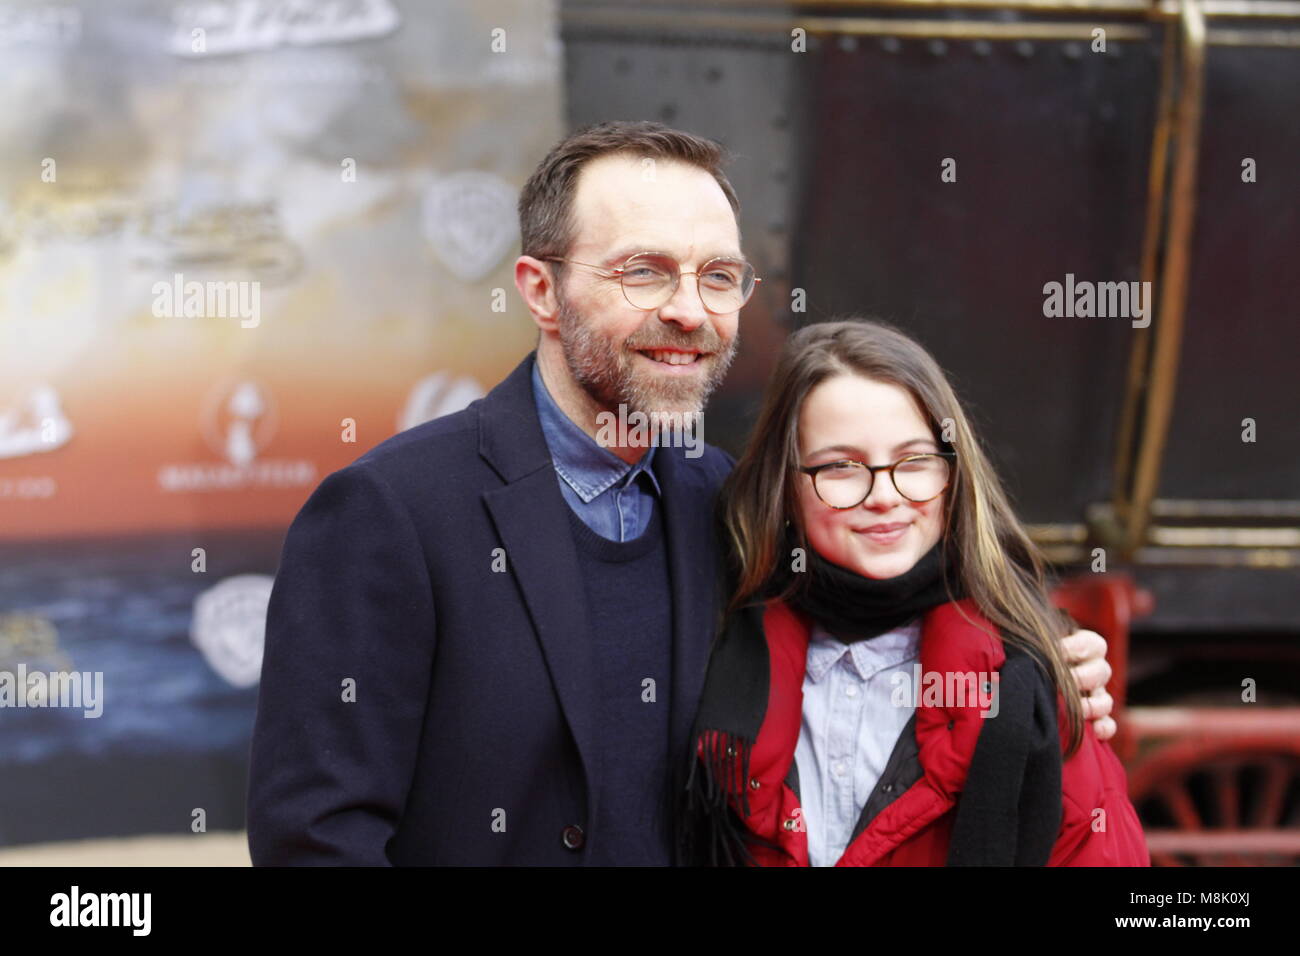 Berlin, Germany. 18th Mar, 2018. Berlin: The world premiere of 'Jim Knopf and Luke the locomotive driver' in front of the Sony Center on Potsdamer Platz. Credit: Simone Kuhlmey/Pacific Press/Alamy Live News Stock Photo